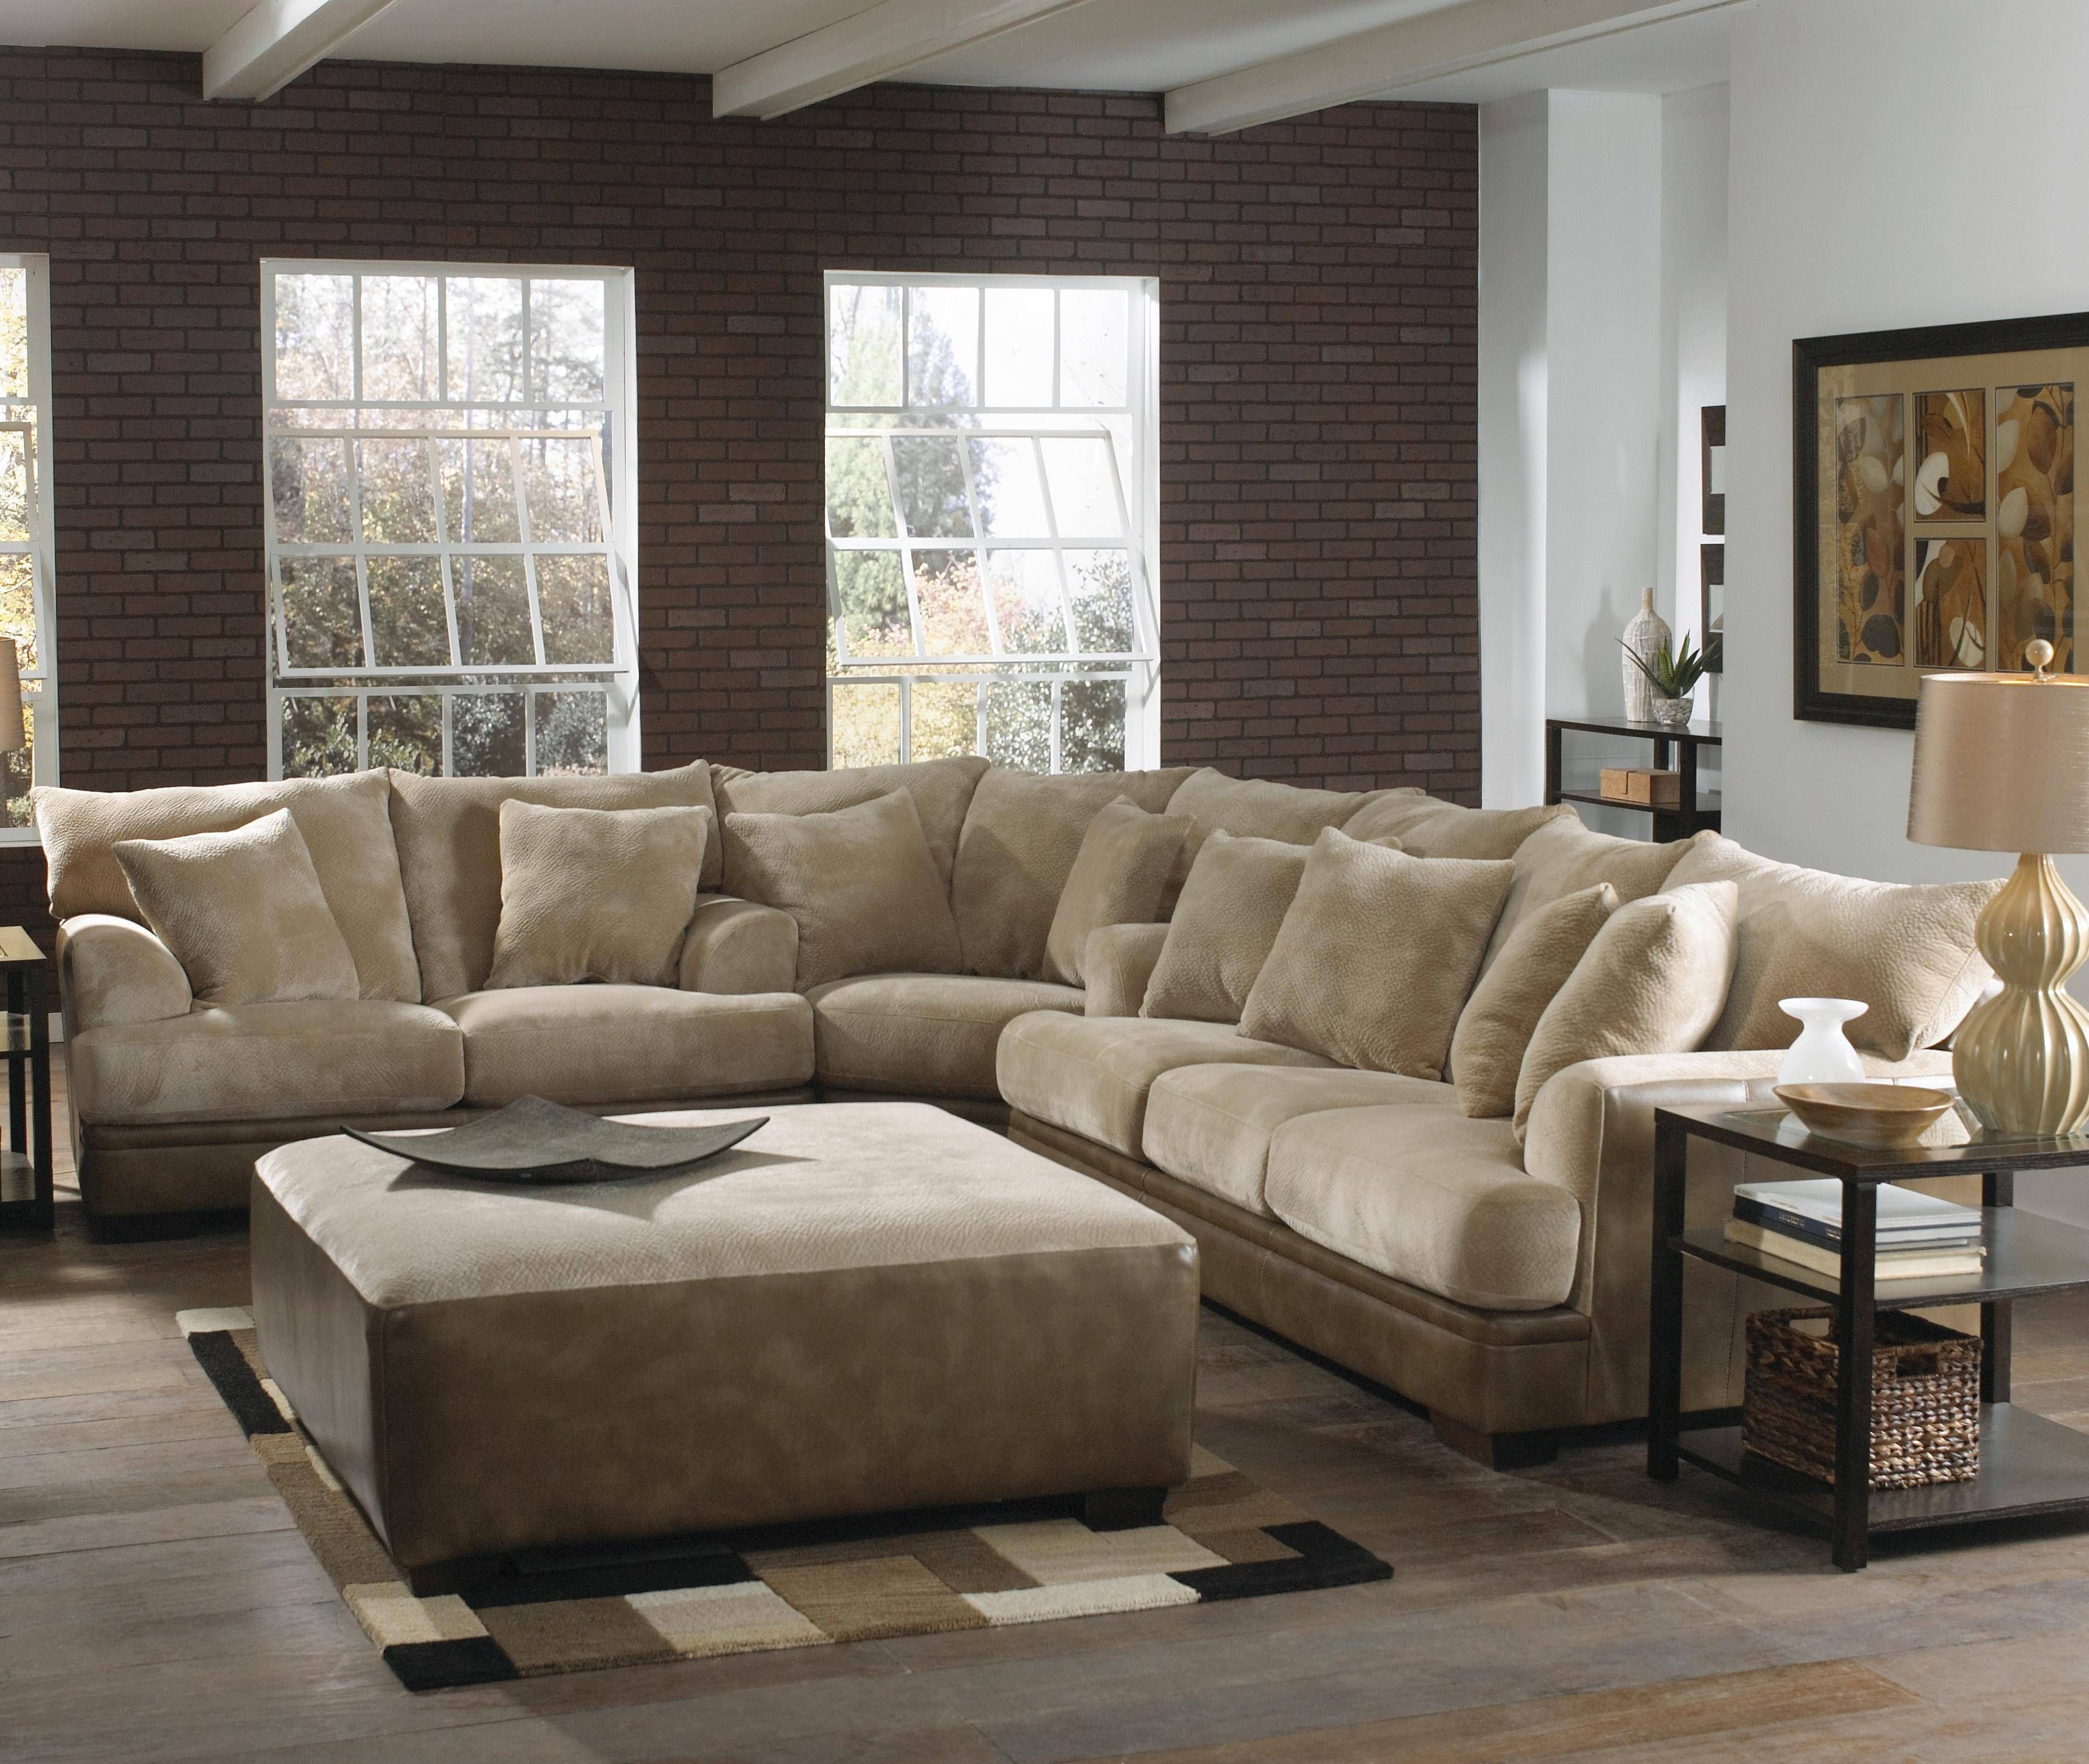 The 30 Best Collection of Extra Large Sectional Sofas